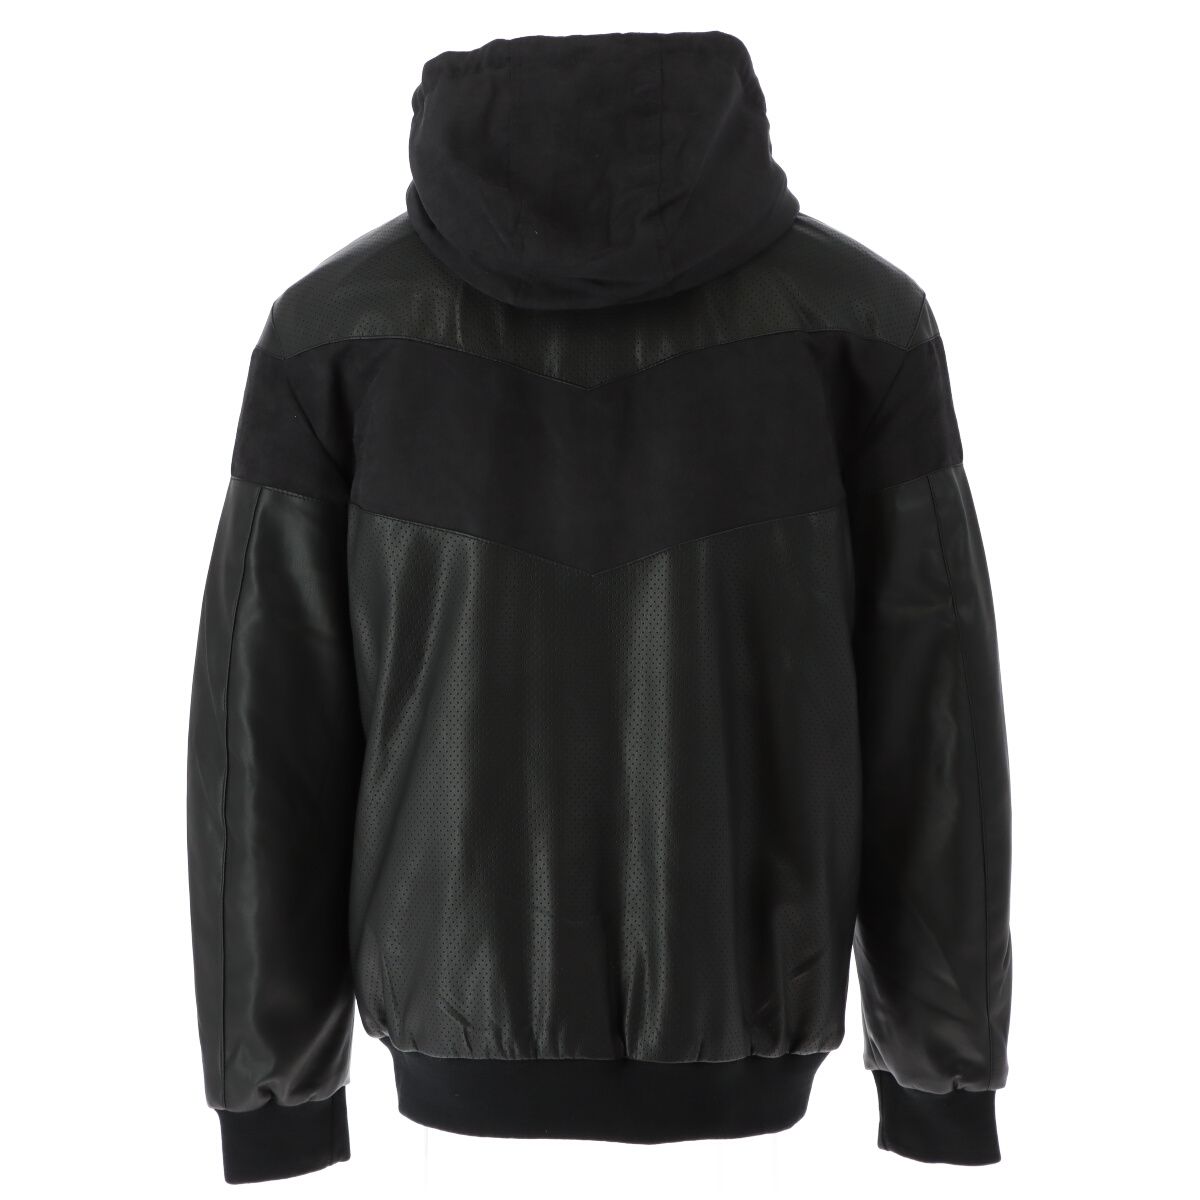 Brand: Guess
Gender: Men
Type: Jackets
Season: Fall/Winter

PRODUCT DETAIL
• Color: black
• Fastening: with zip
• Sleeves: long
• Collar: hood
• Pockets: zip pockets

COMPOSITION AND MATERIAL
• Composition: -2% elastane -98% polyester